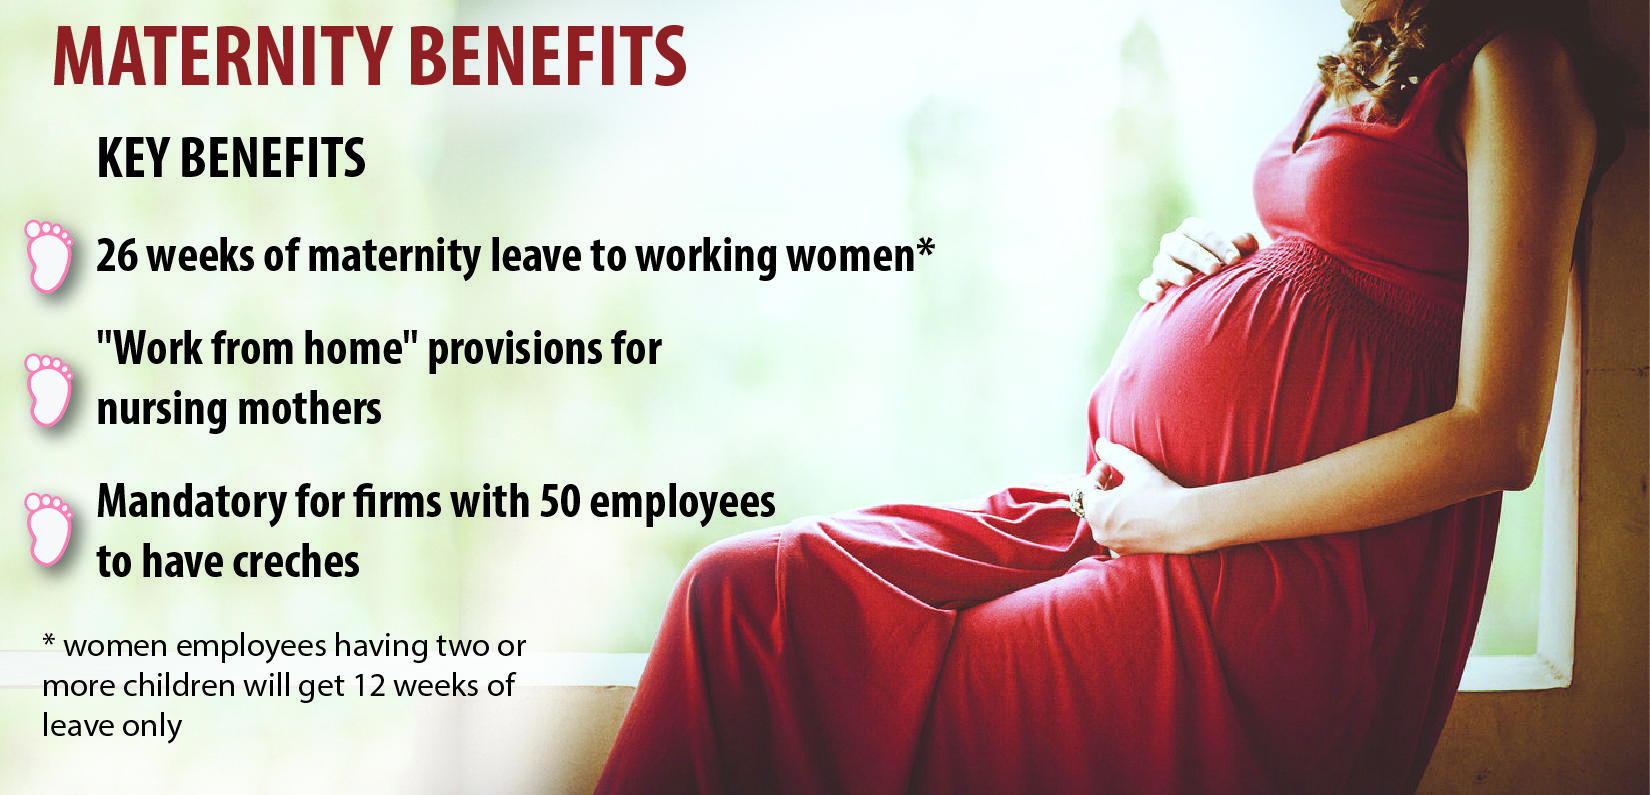 What ails the Maternity Benefit Bill? | TJinsite